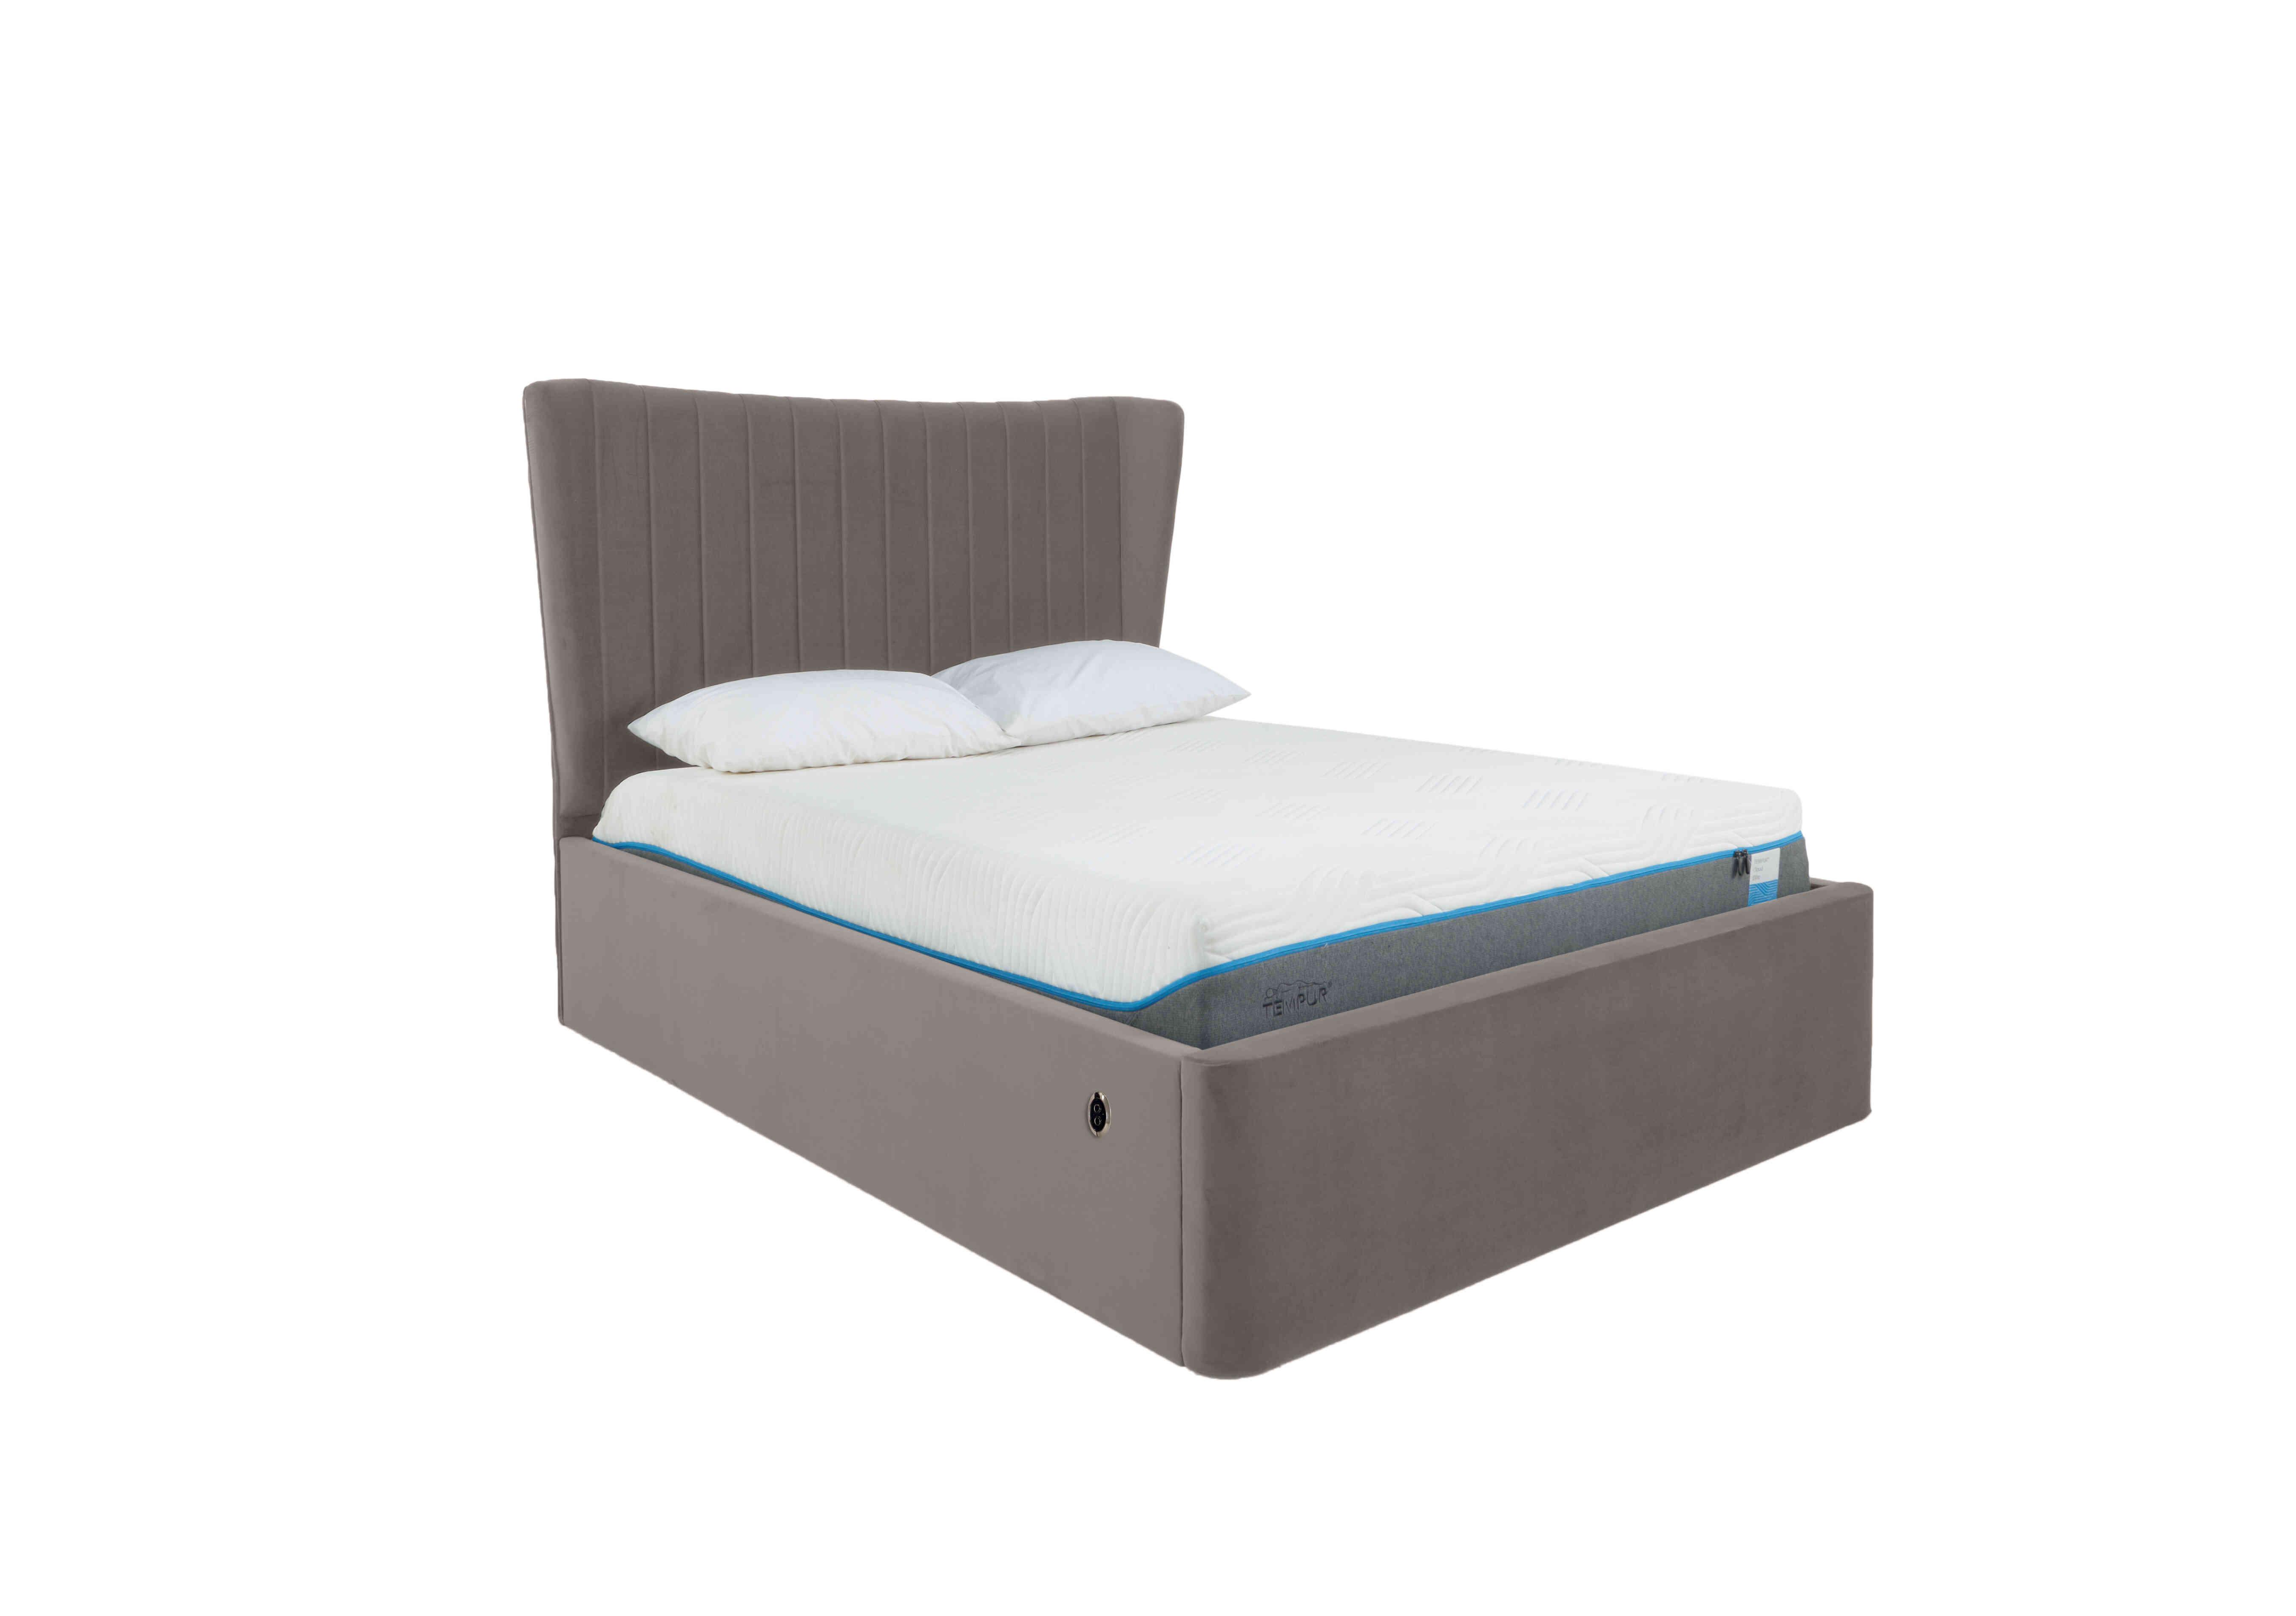 Roman Electric Ottoman Bed Frame in Sanderson Potters Clay on Furniture Village